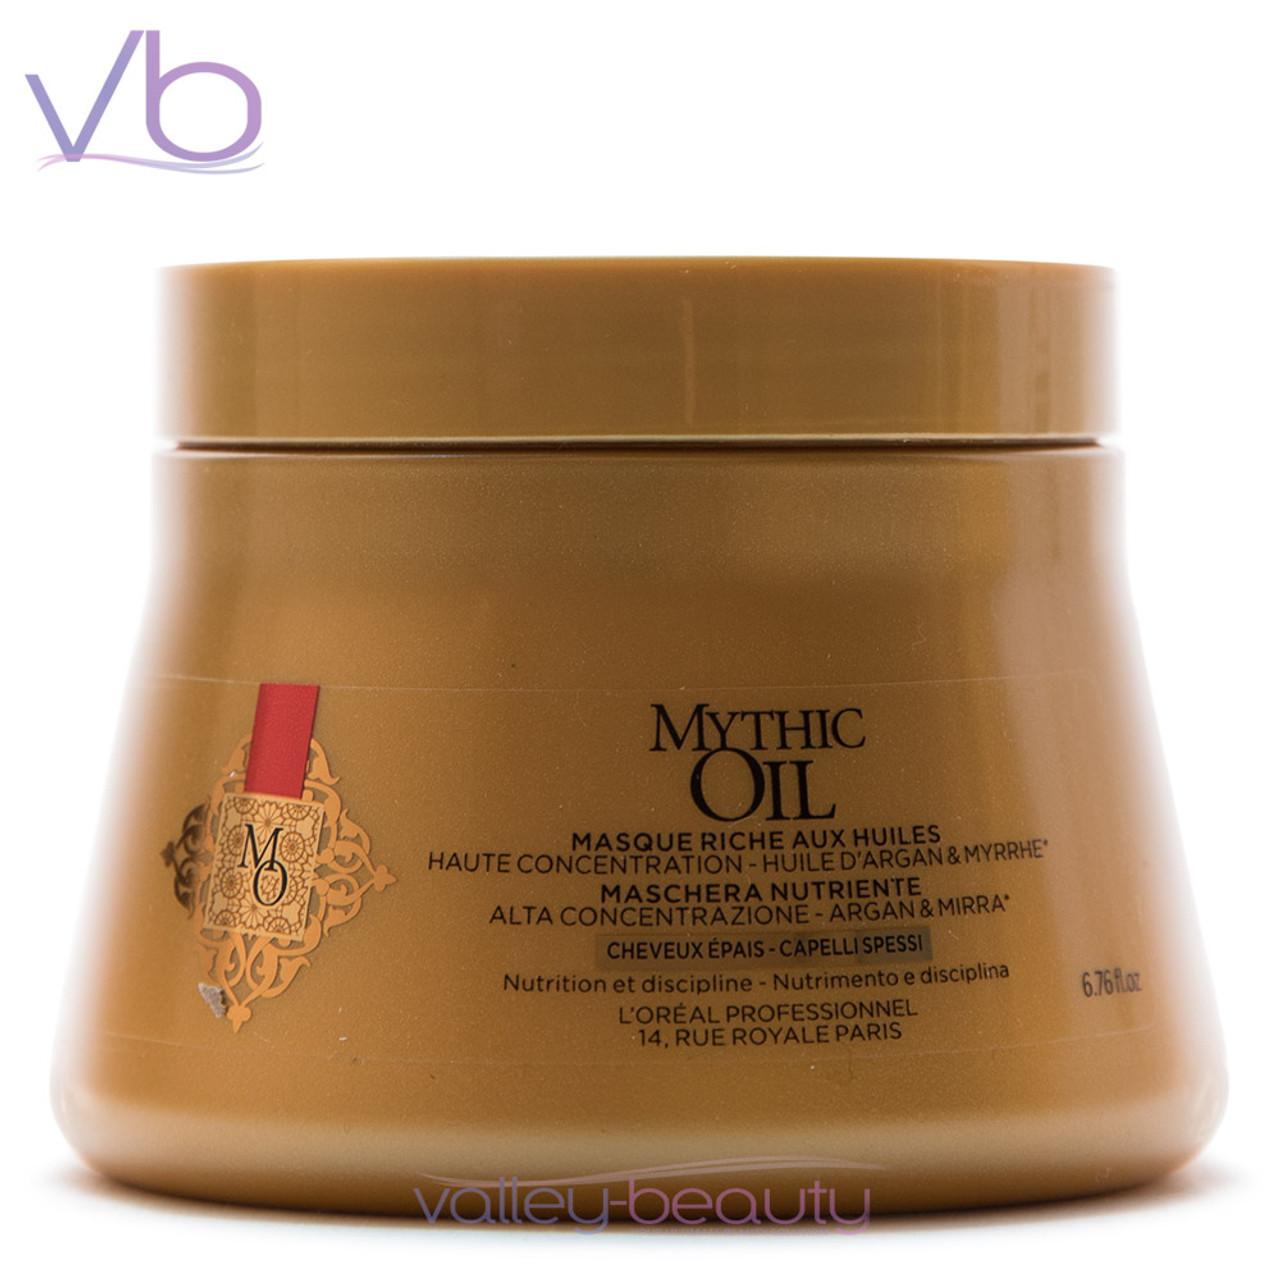 Loreal Mythic Oil Hair Care Range Review 